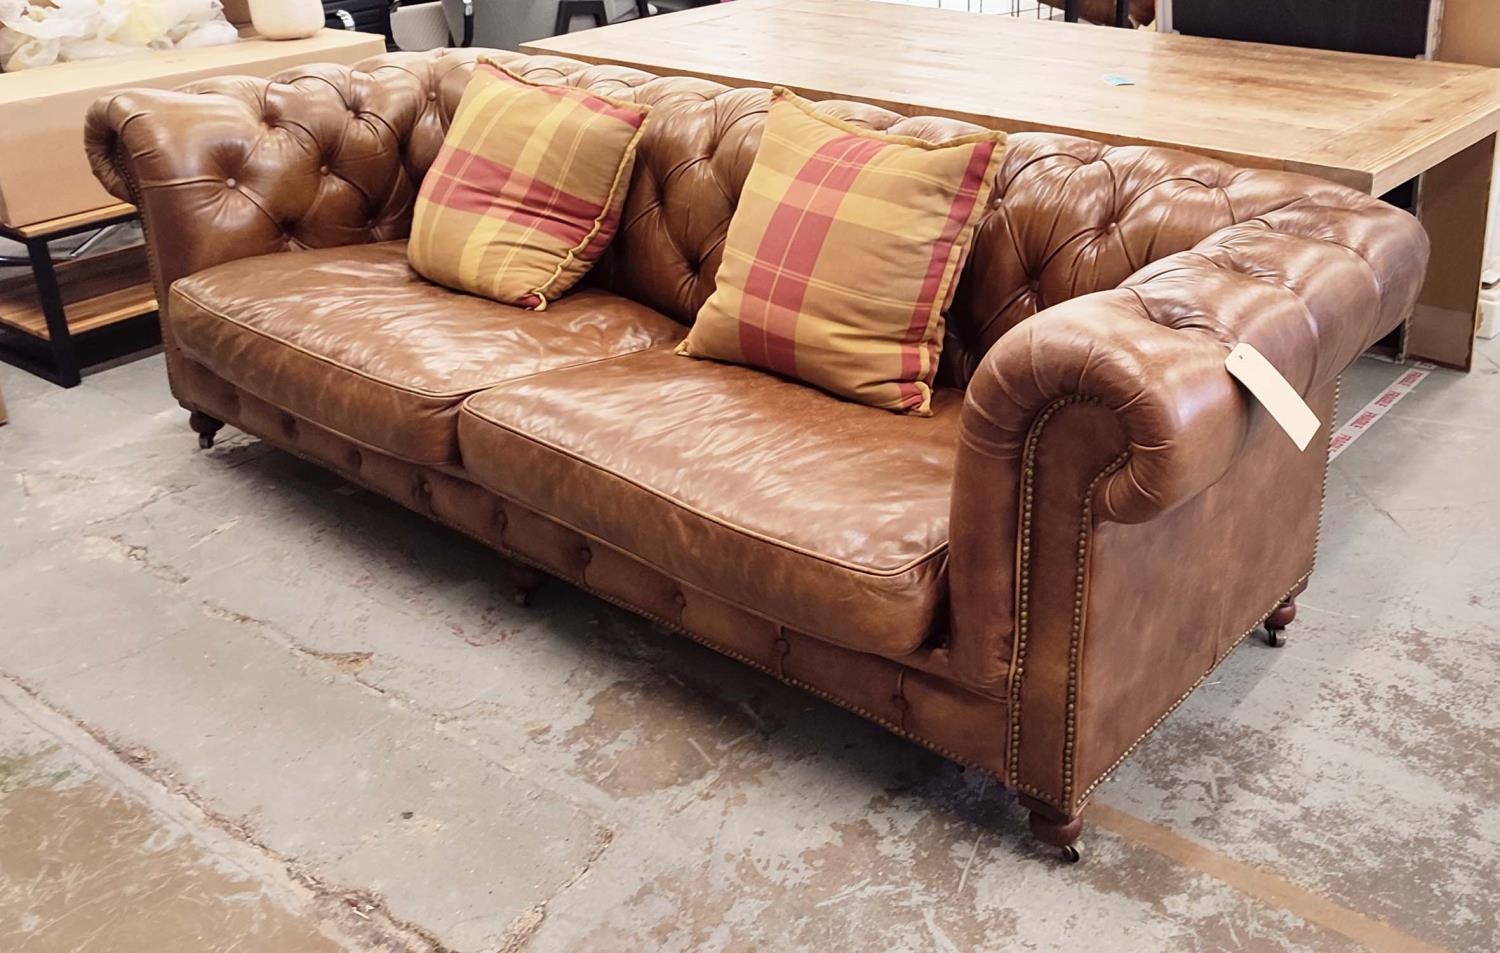 CHESTERFIELD SOFA, in buttoned brown leather, 95cm D x 80cm H x 255cm W, with two cushions.